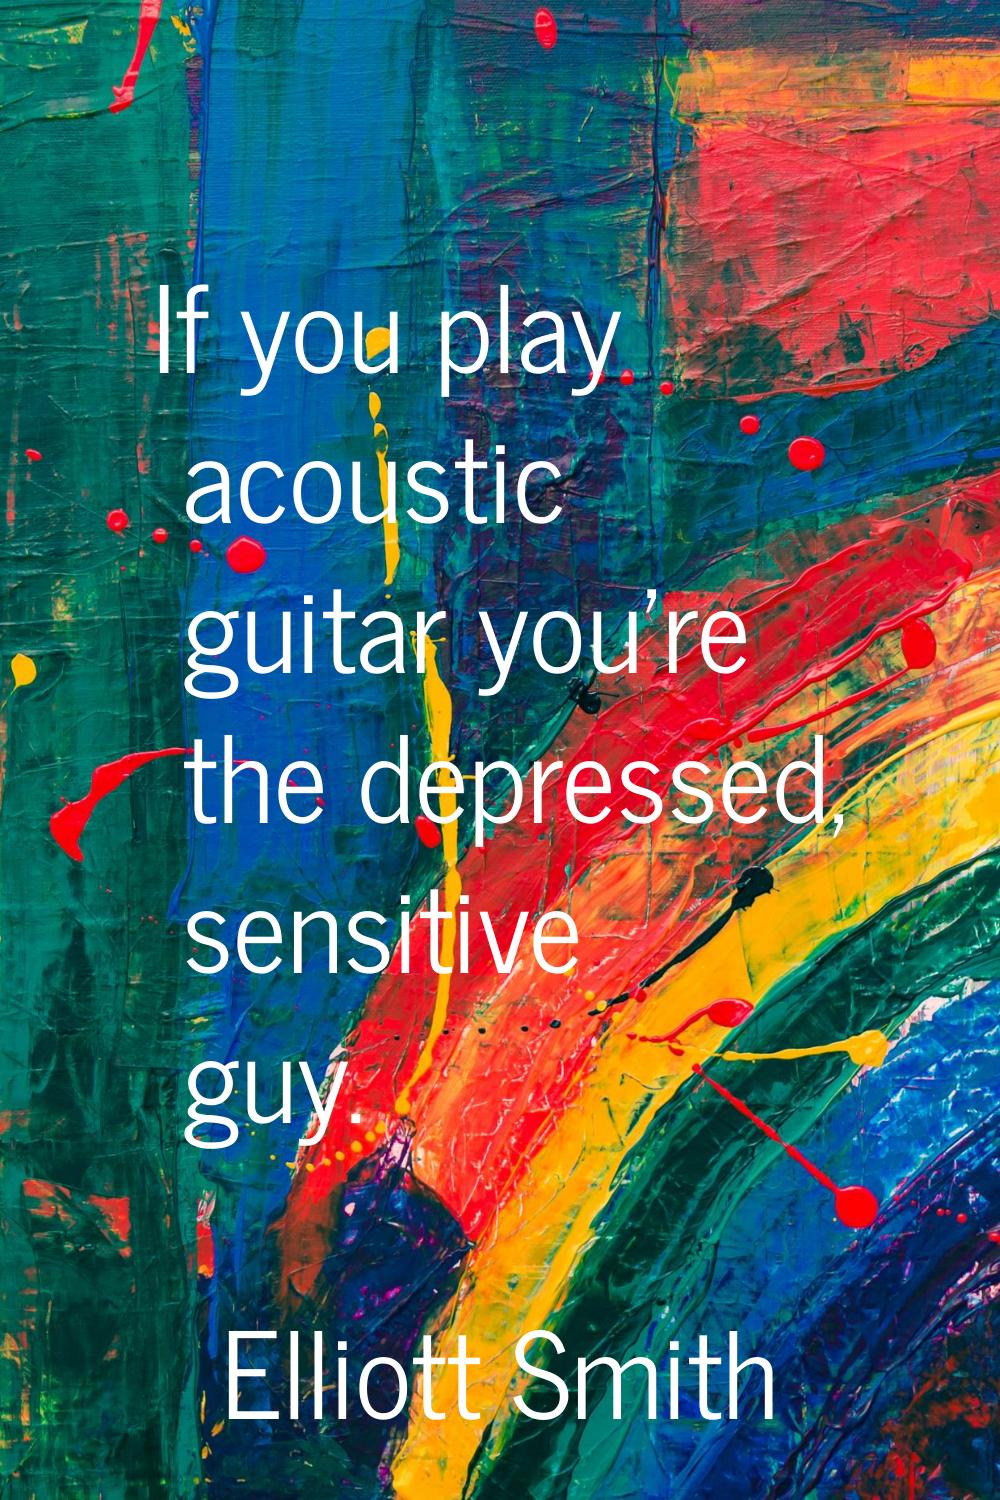 If you play acoustic guitar you're the depressed, sensitive guy.